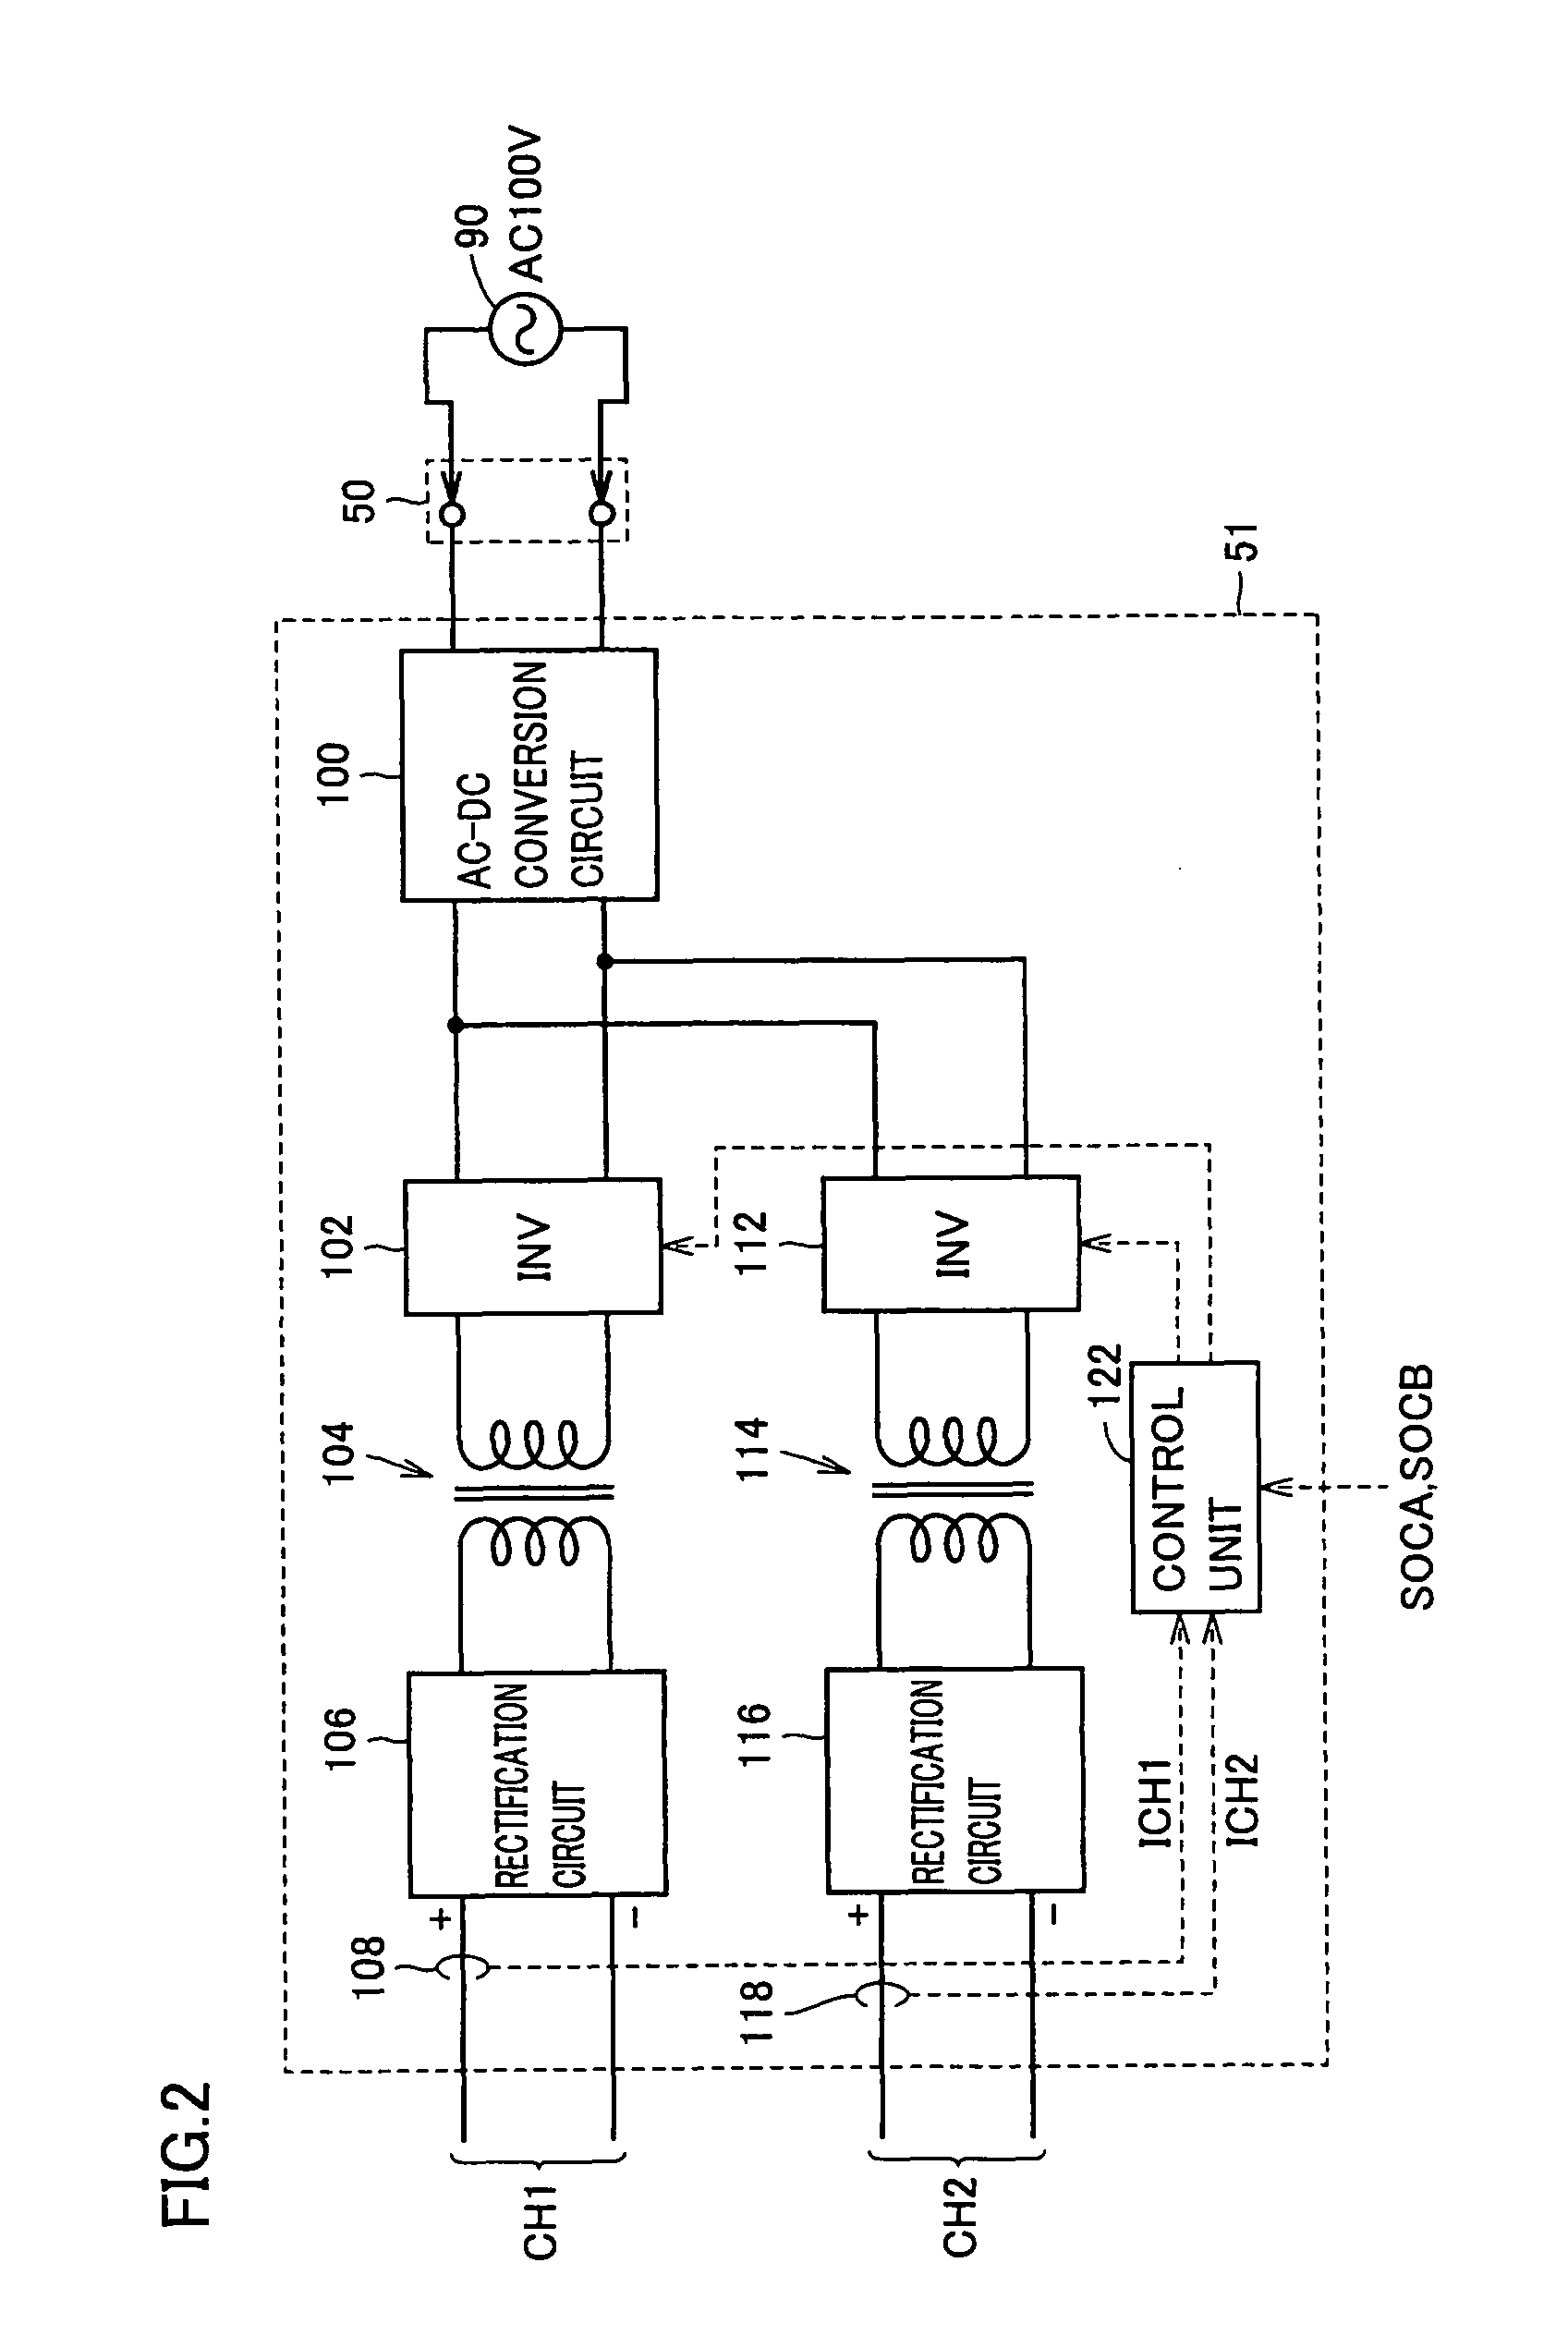 Power supply system for vehicle